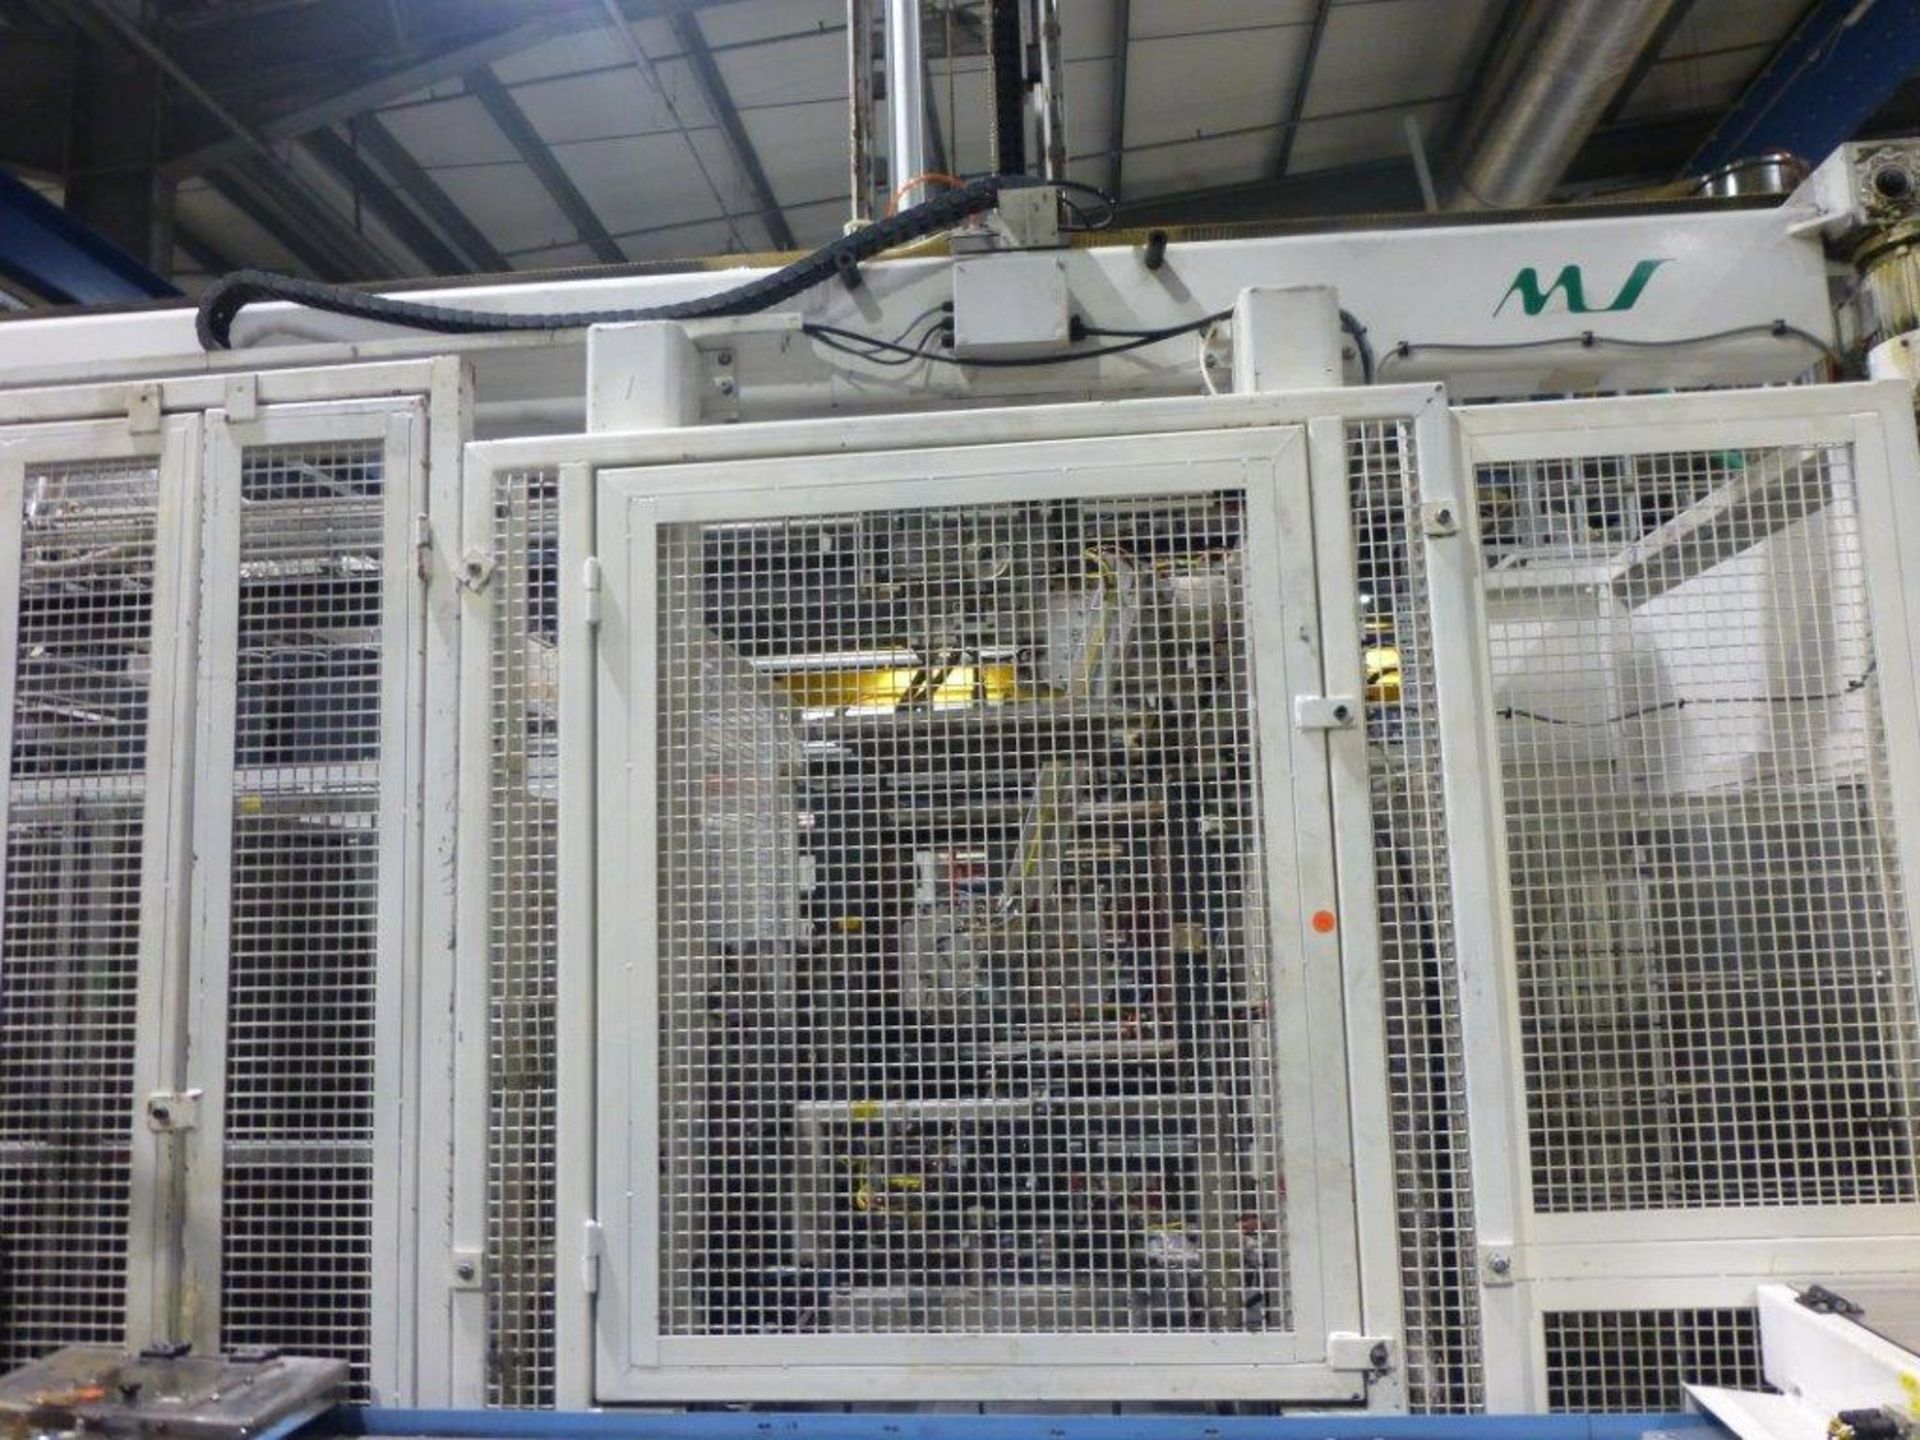 Mechatronic Solutions Type MSP 7 automated DVD case twin arm picking/stacking system, plant No 10293 - Image 4 of 7